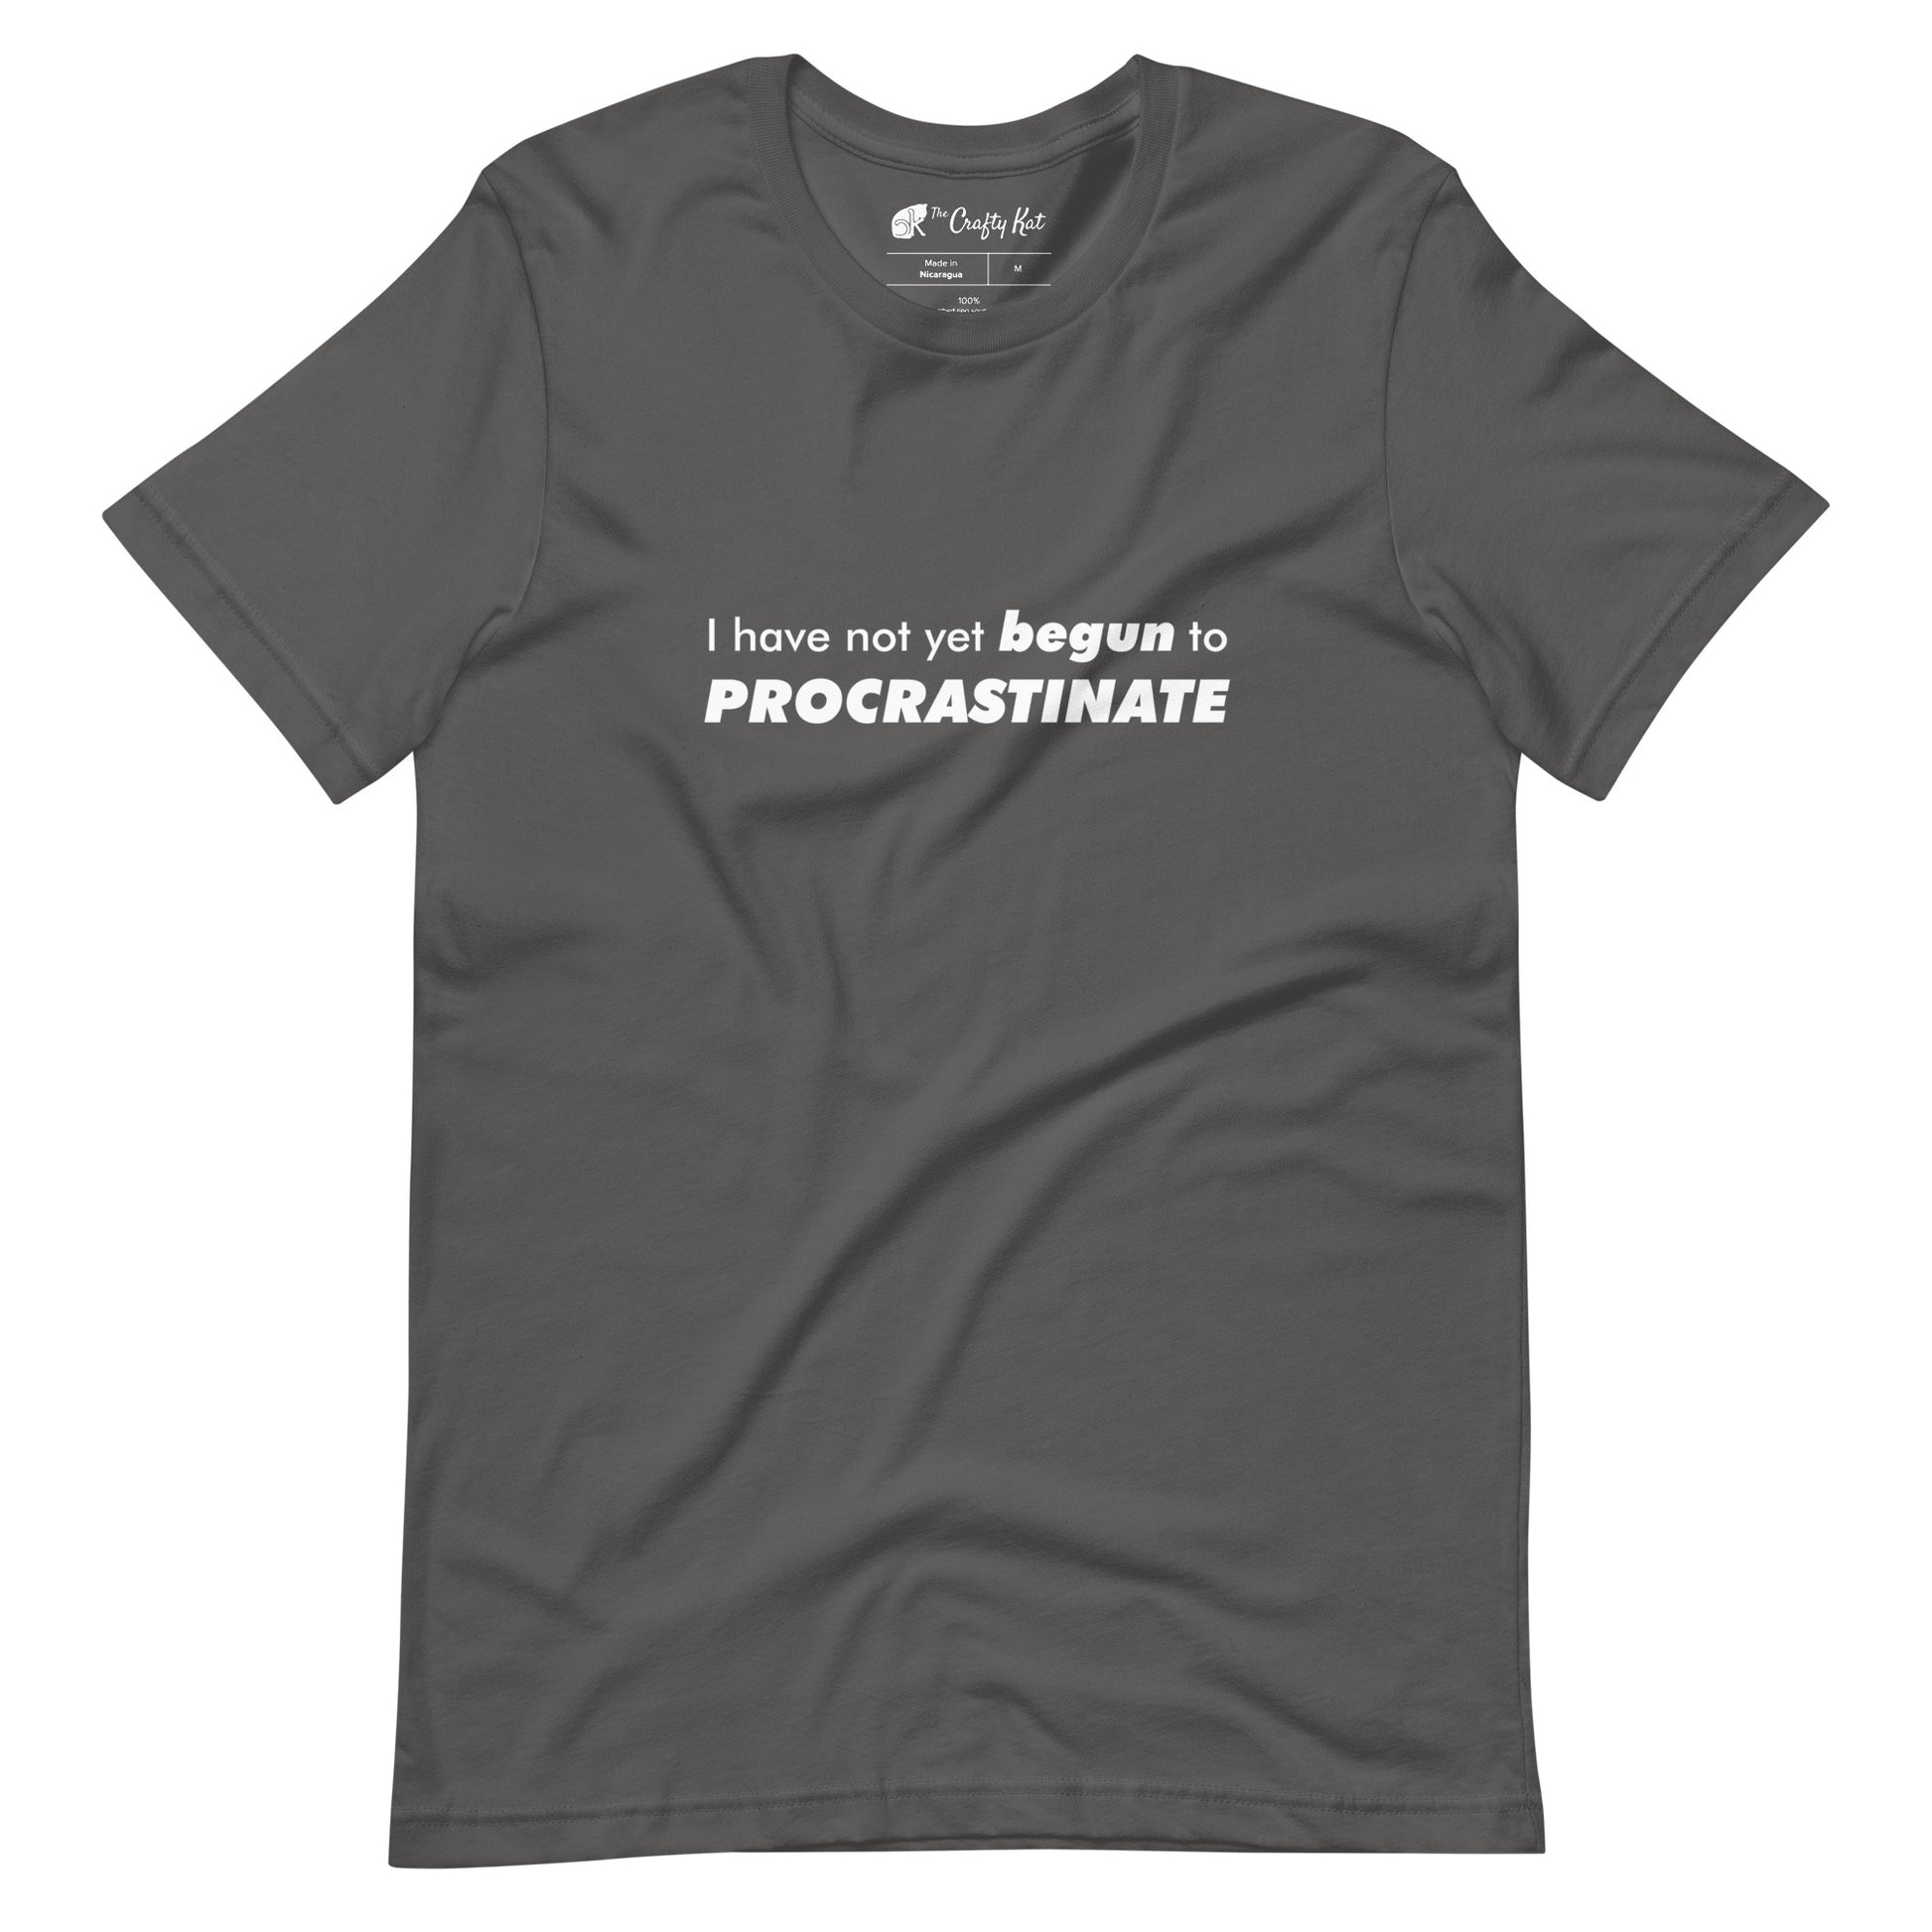 Asphalt gray t-shirt with text graphic: "I have not yet BEGUN to PROCRASTINATE"